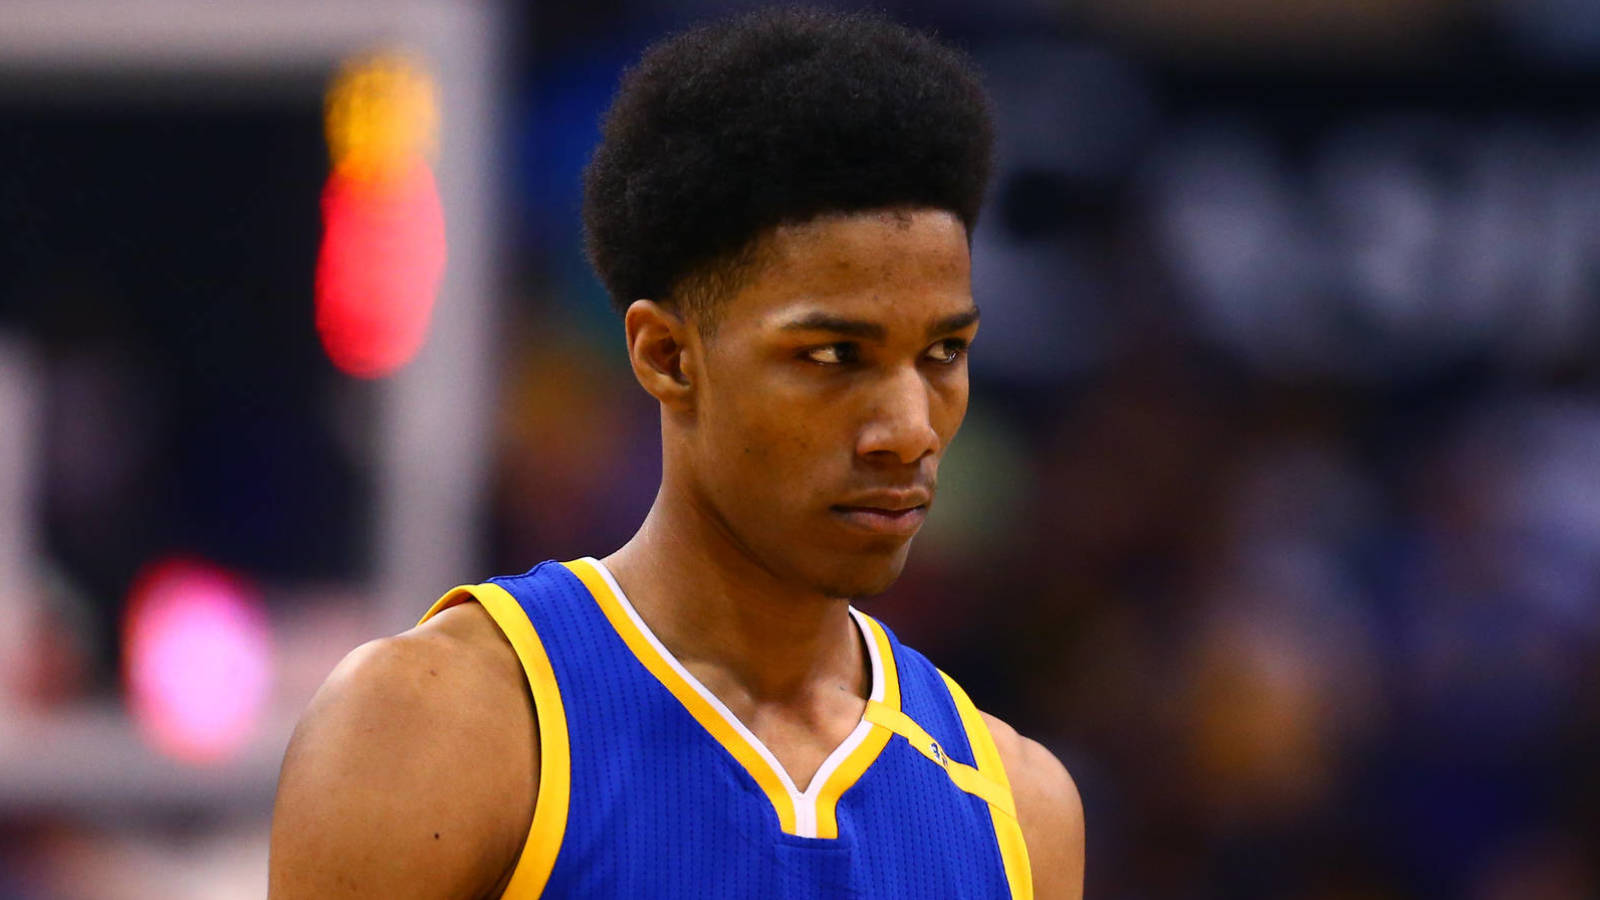 patrick mccaw new jersey number